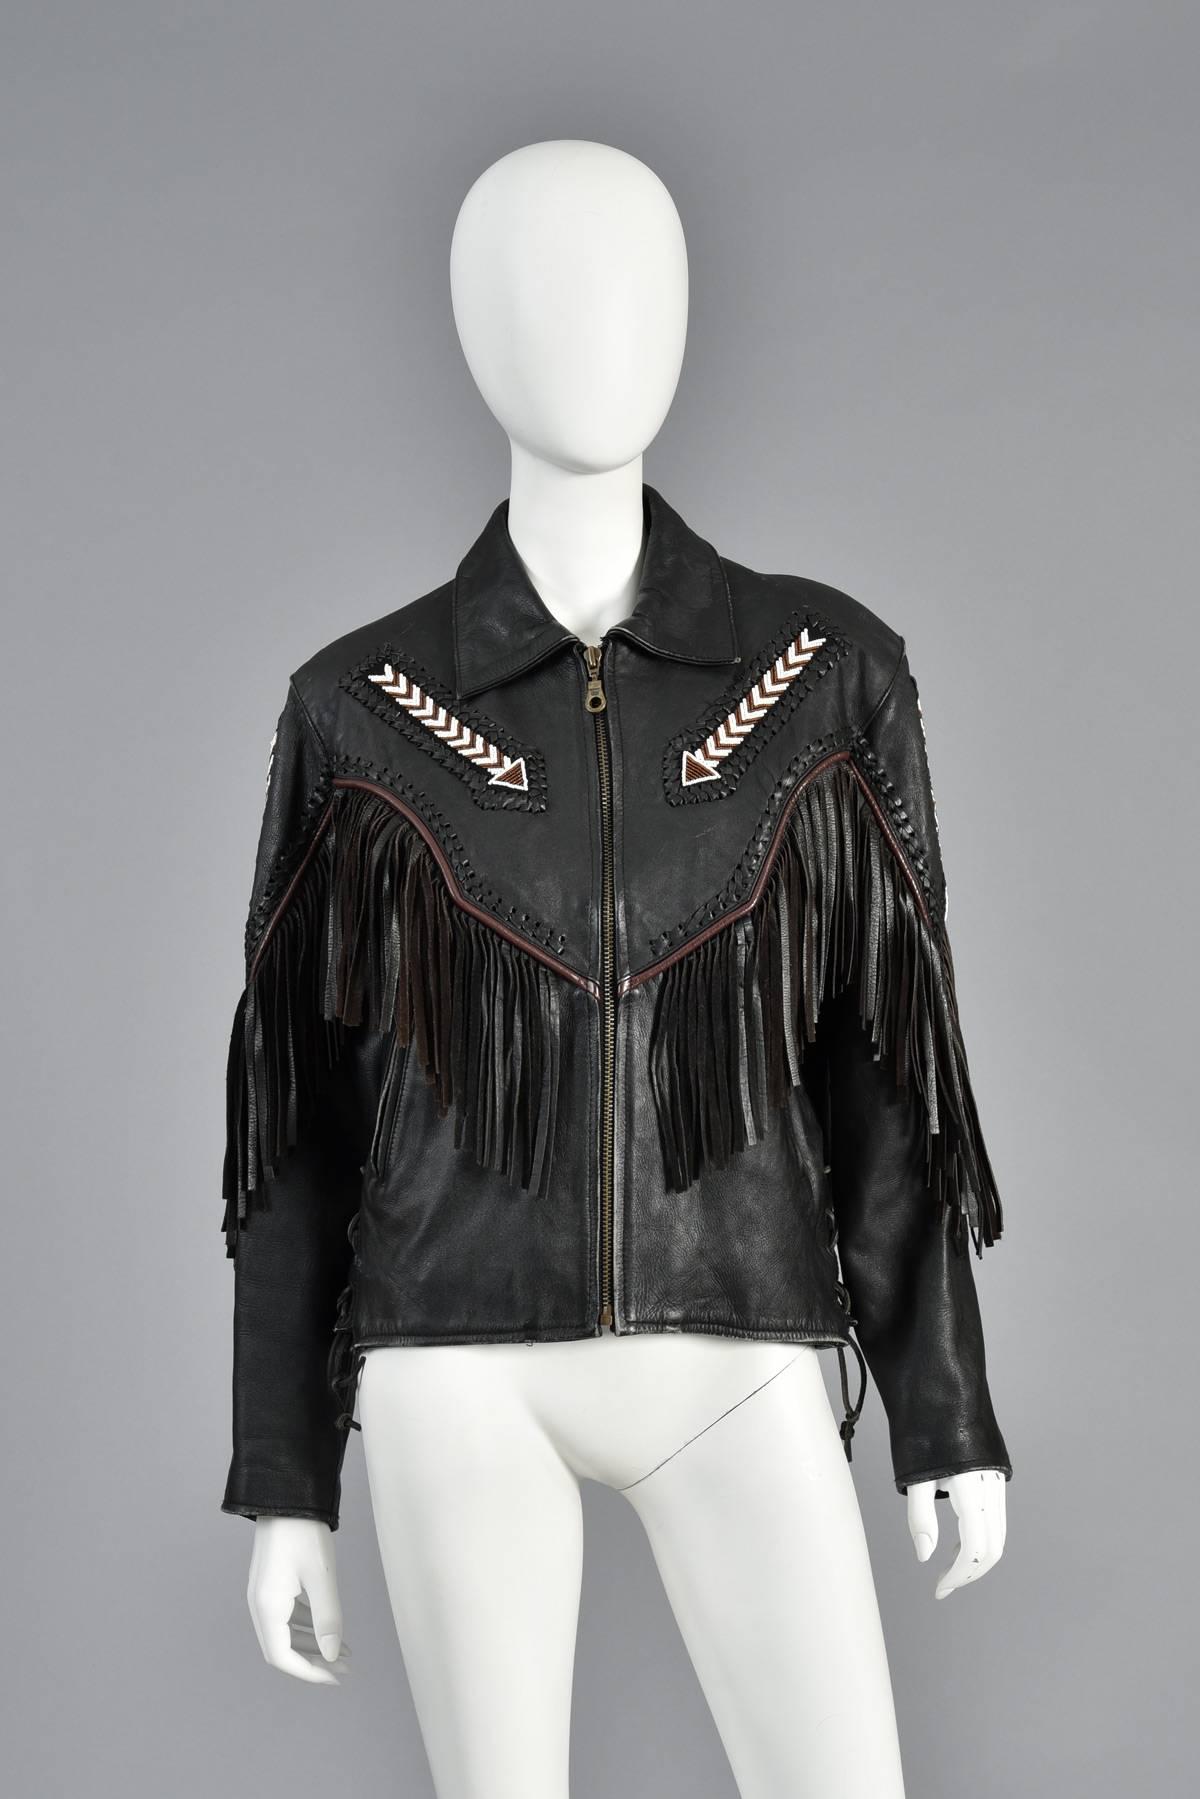 Super awesome southwest inspired  black leather vintage biker jacket. Such a killer piece! This piece features a super skinny fit with zip front, corseted sides, beaded native-inspired details and fringe galore. We especially love the contrasting